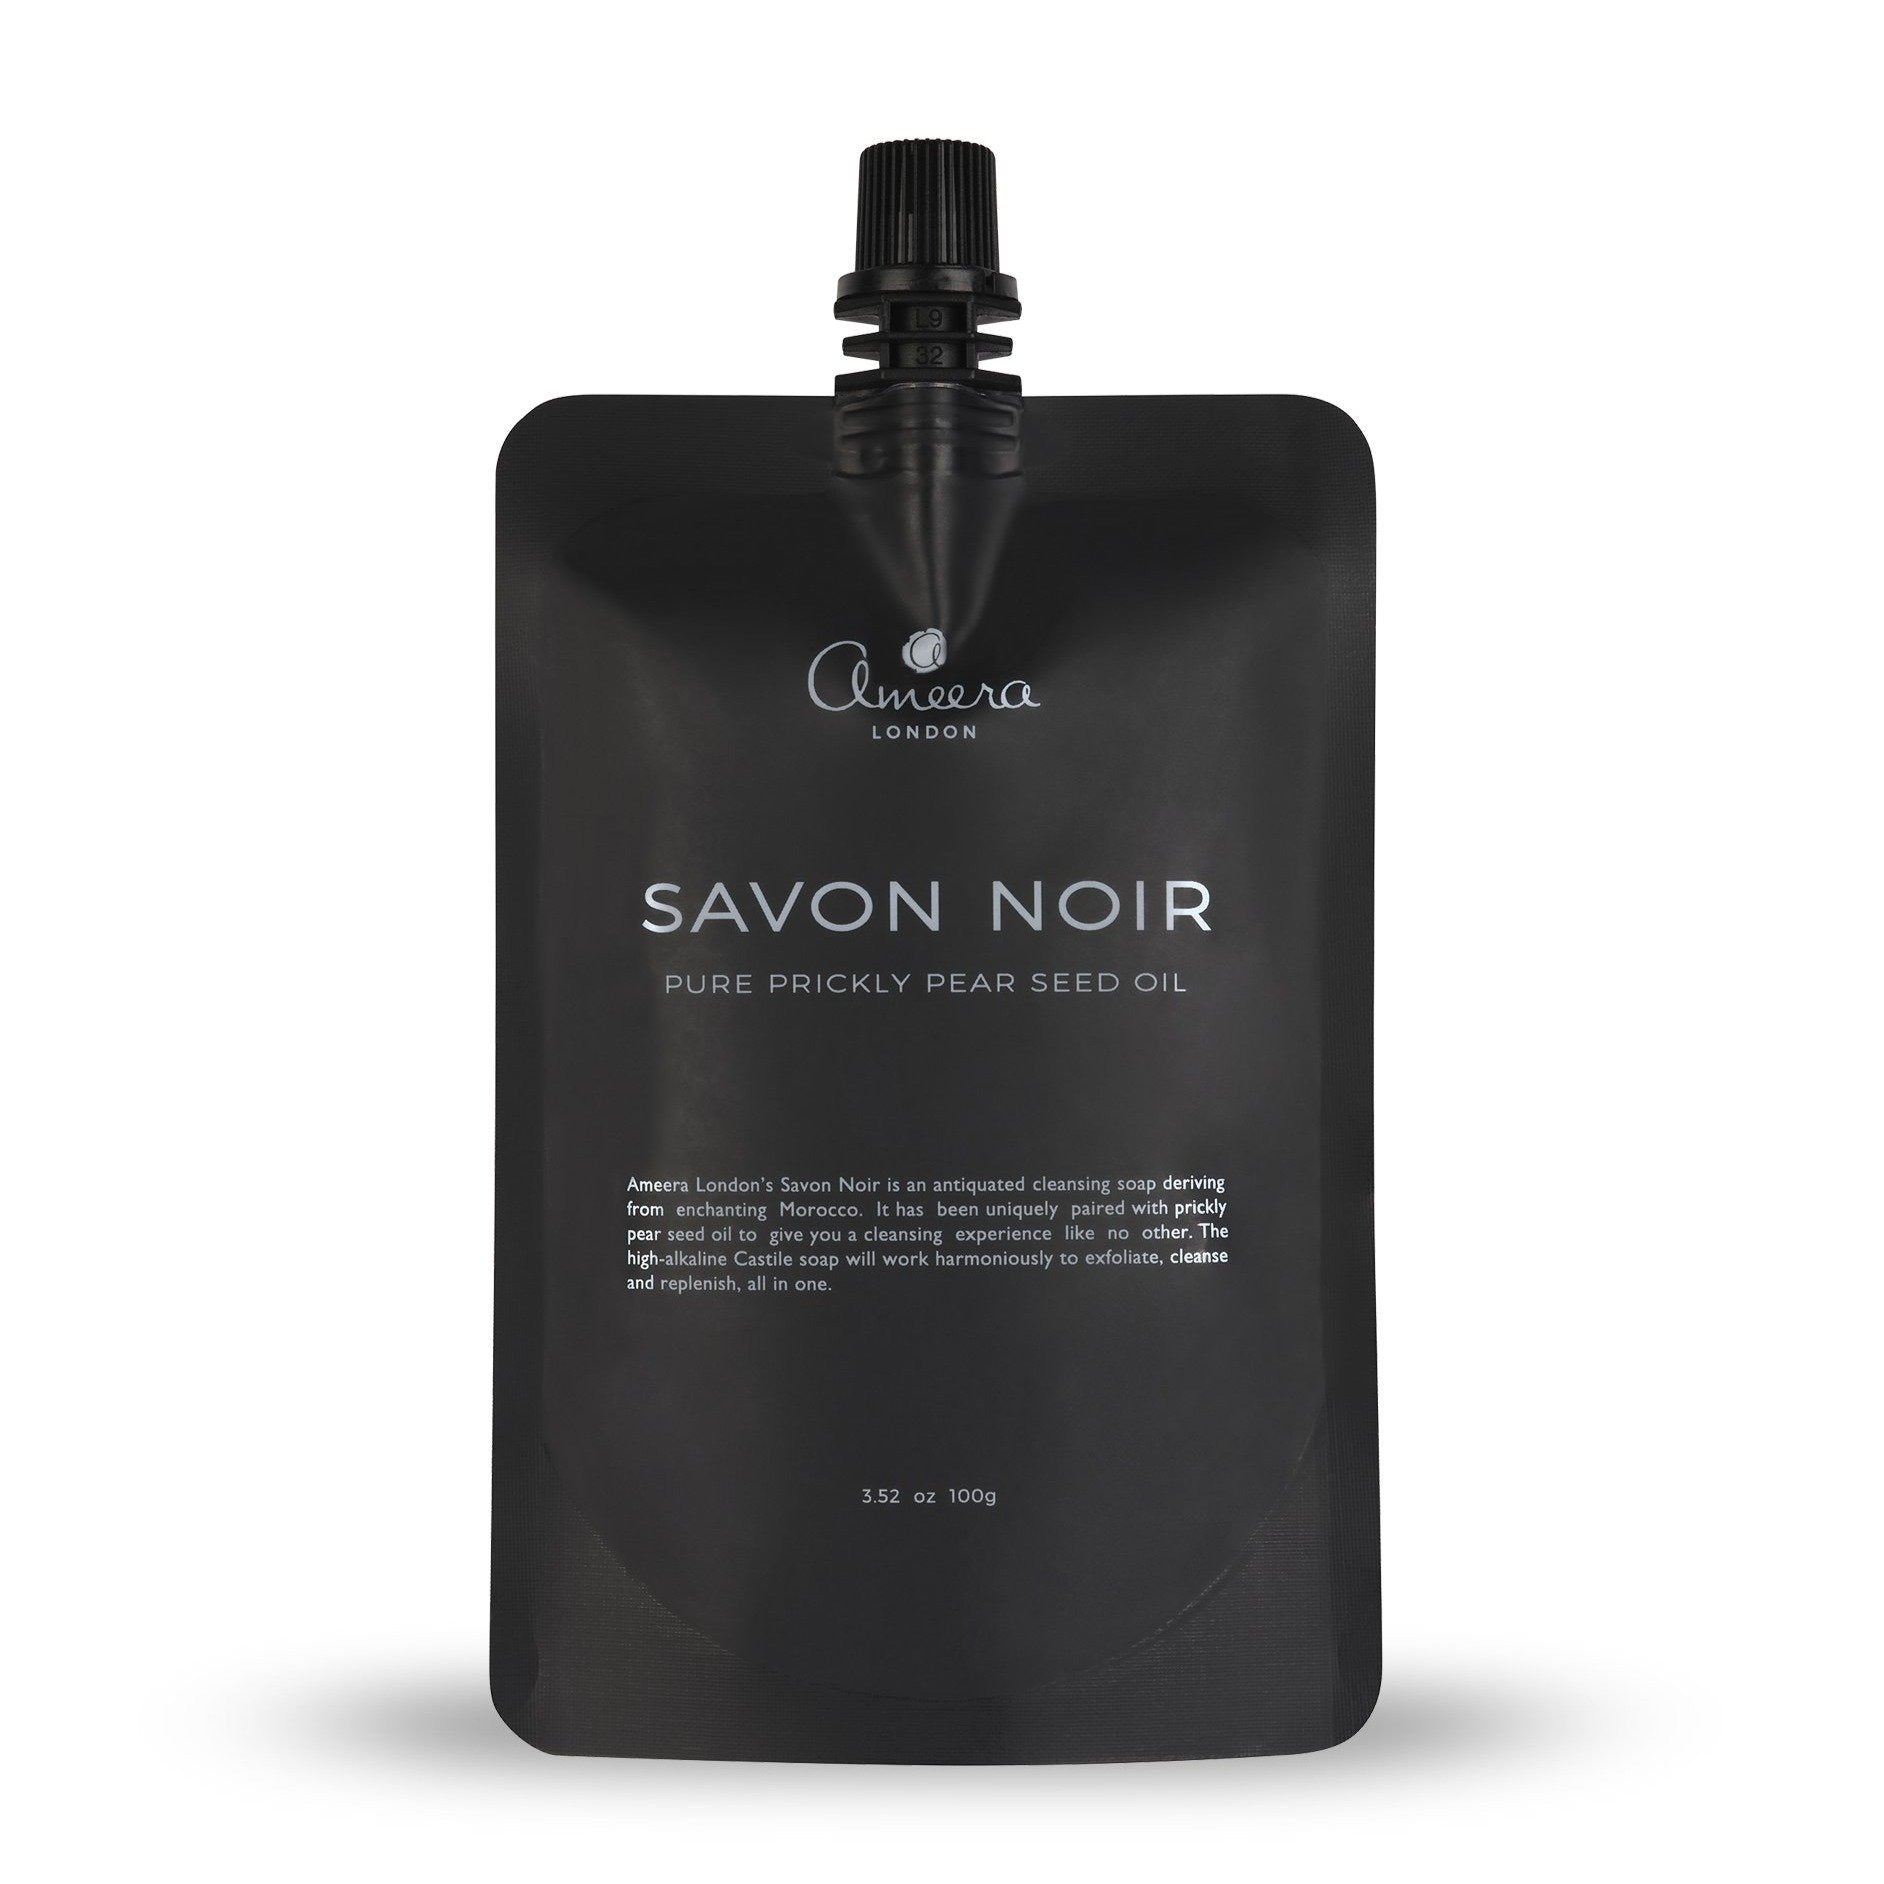 An antiquated, organic cleansing soap deriving from enchanting Morocco, our Savon Noir has been uniquely paired with prickly pear seeds to give you a cleansing experience like no other. This high-alkaline castile soap will work harmoniously to exfoliate, cleanse and replenish, all in one.  Containing a high concentration of Amino Acids, Omega 9, Omega 6 and Vitamins A, B, E, and K, use this cleansing miracle worker a few times a week to tackle lacklustre skin and give you fresh, radiate, glowing skin.